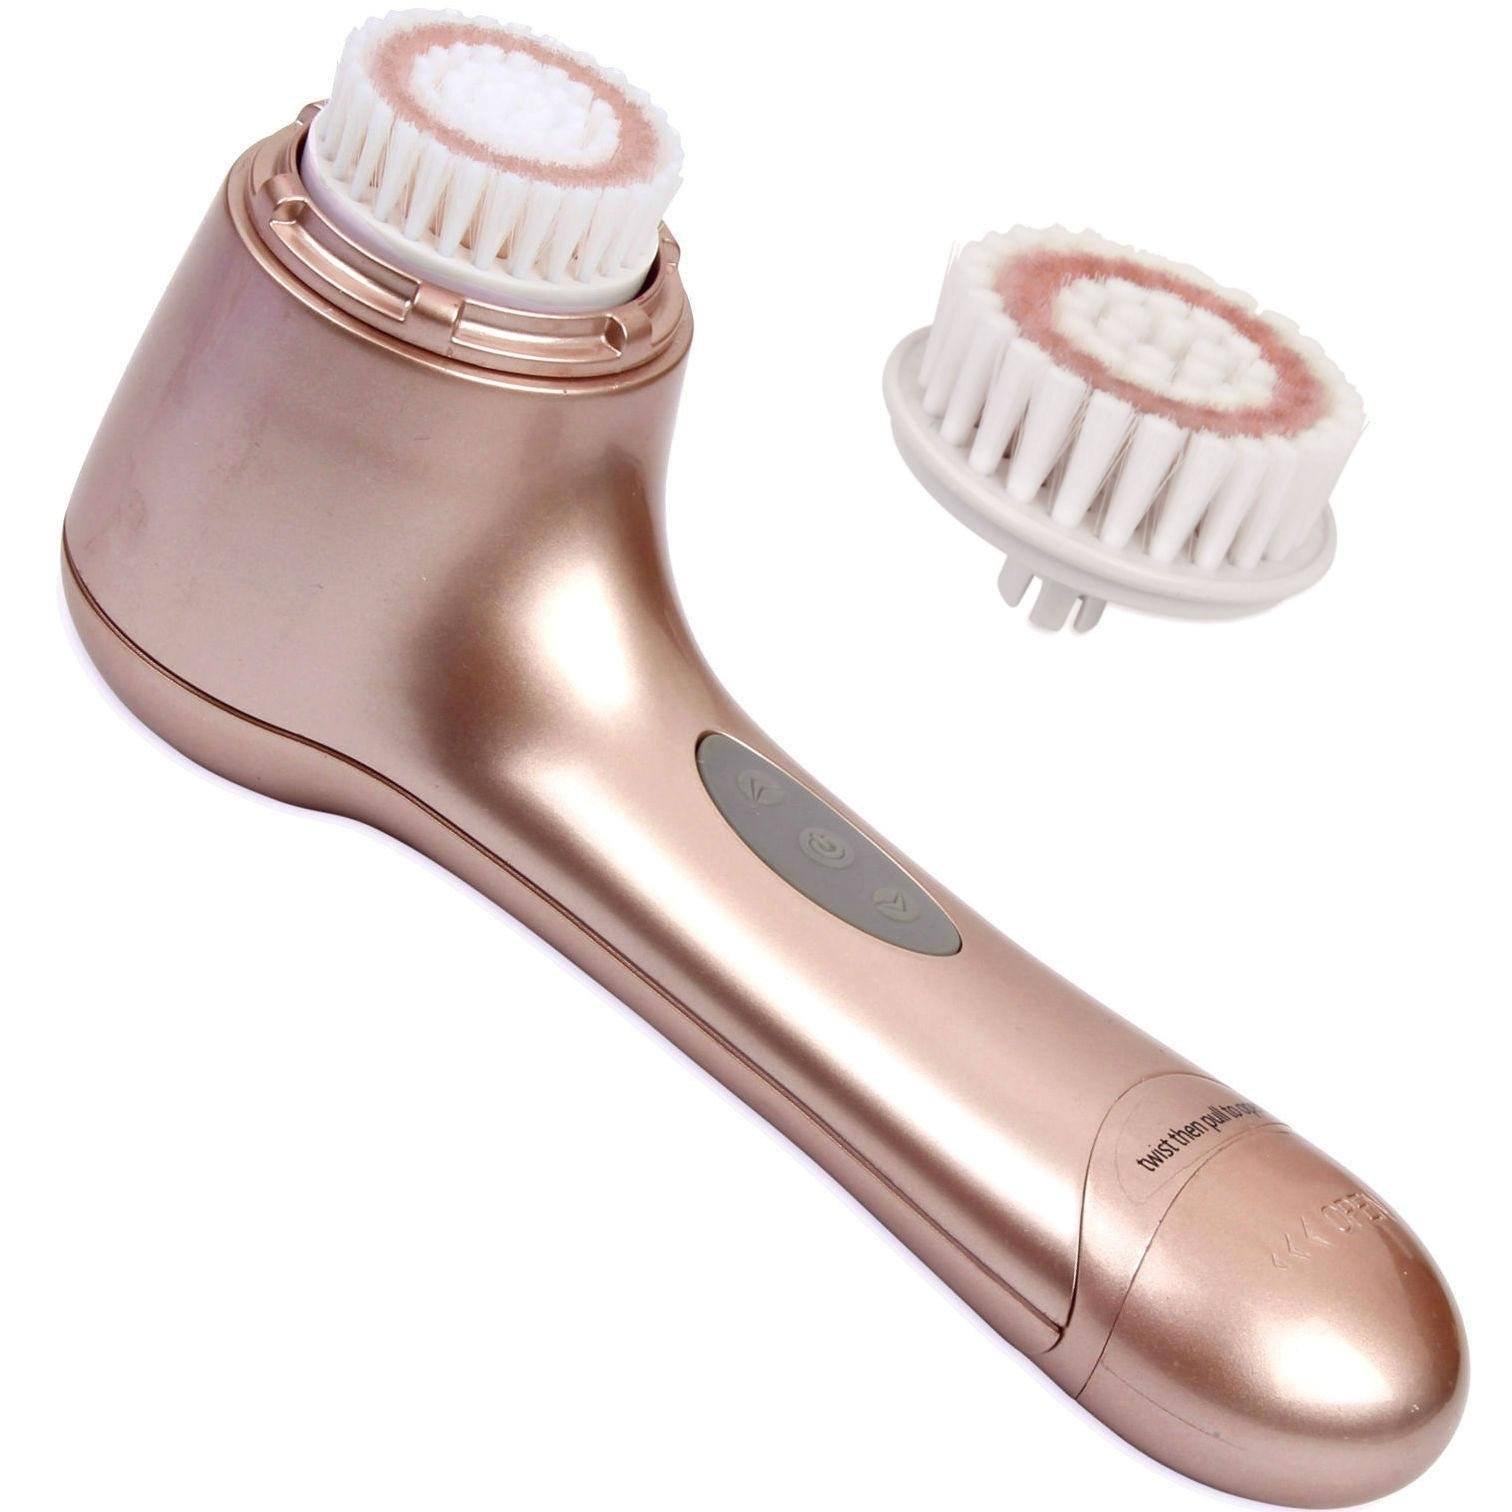 best of Facial cleaners Brush